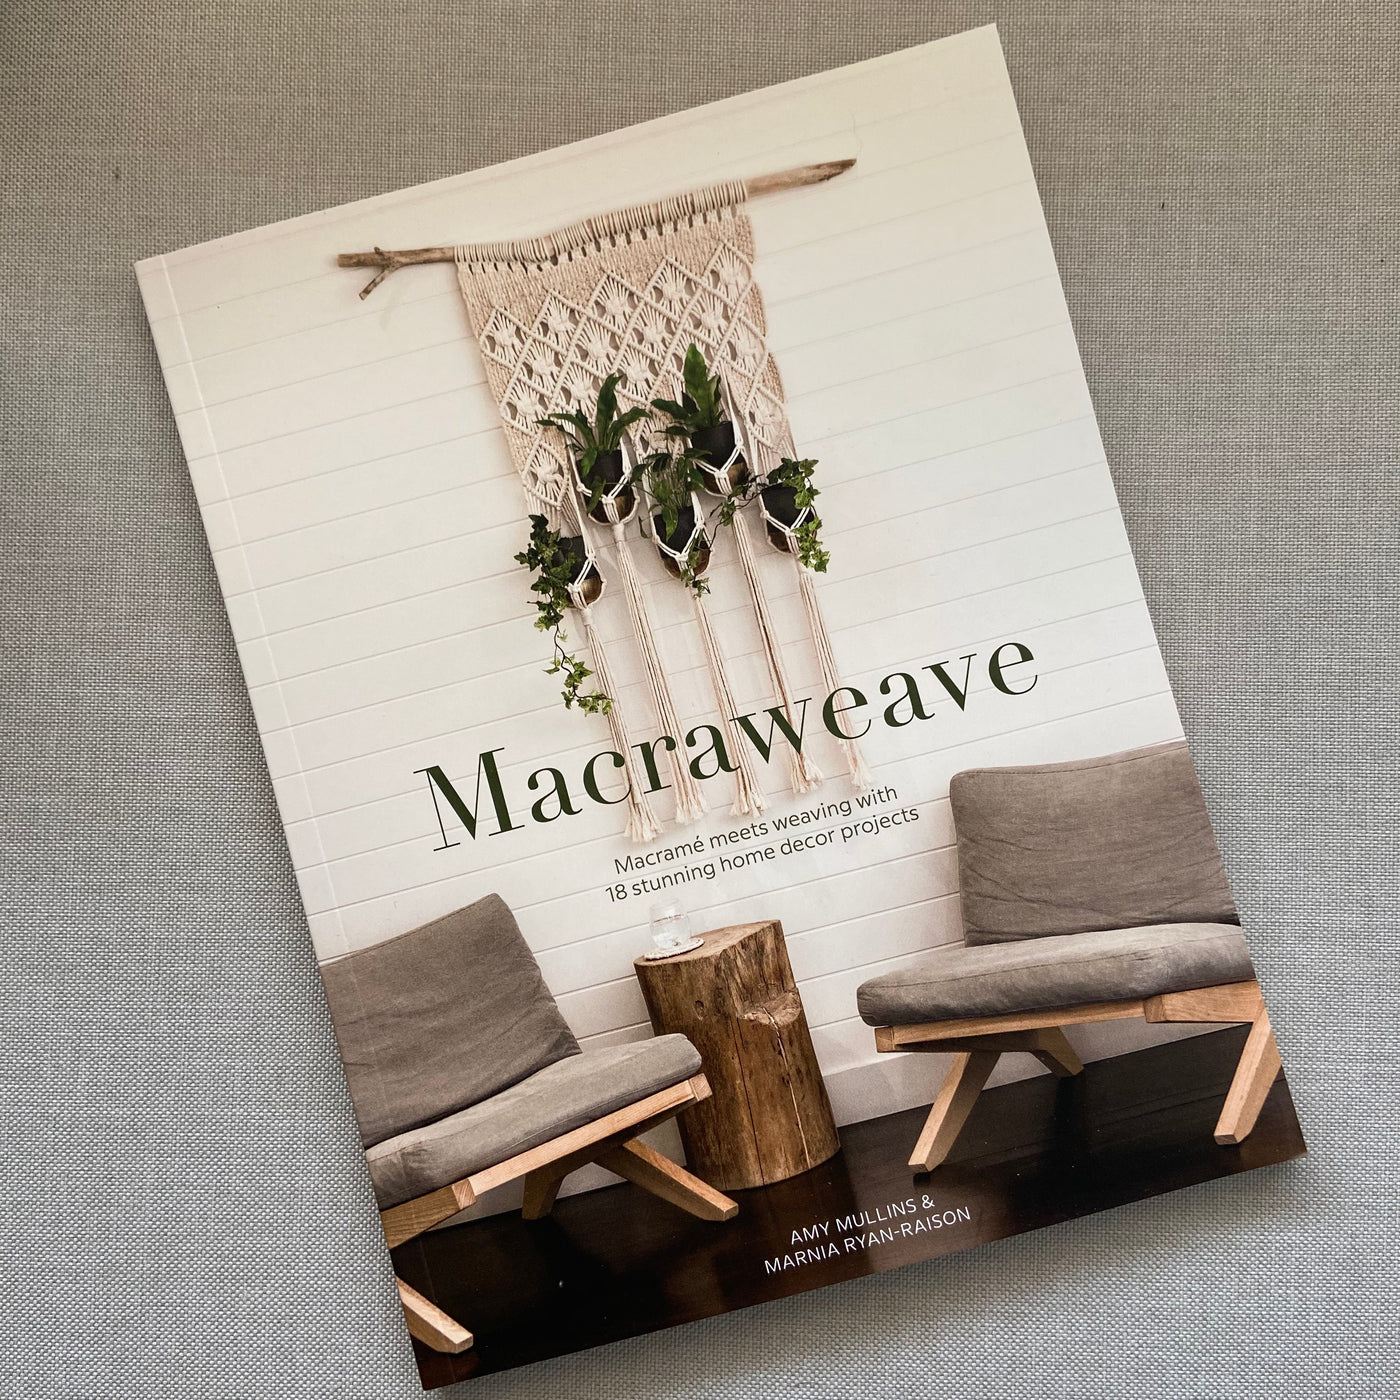 f you are a lover of MACRAME FOR BEGINNERS AND BEYOND you will be sure to love this new fibre art book.  Combining both macrame and weaving, this book has 18 stunning projects including woven wall hangings, plant hangers and cushions as well accessories.  Created by Amy & Marnia from EdenEve macrame, this book is a comprehensive guide to creating projects that combine both crafts.   Paperback  Language - English  128pp  Authors : Amy Mullins & Marnia Ryan-Raison  Contains 18 projects   27cms x 22cms  RRP $4